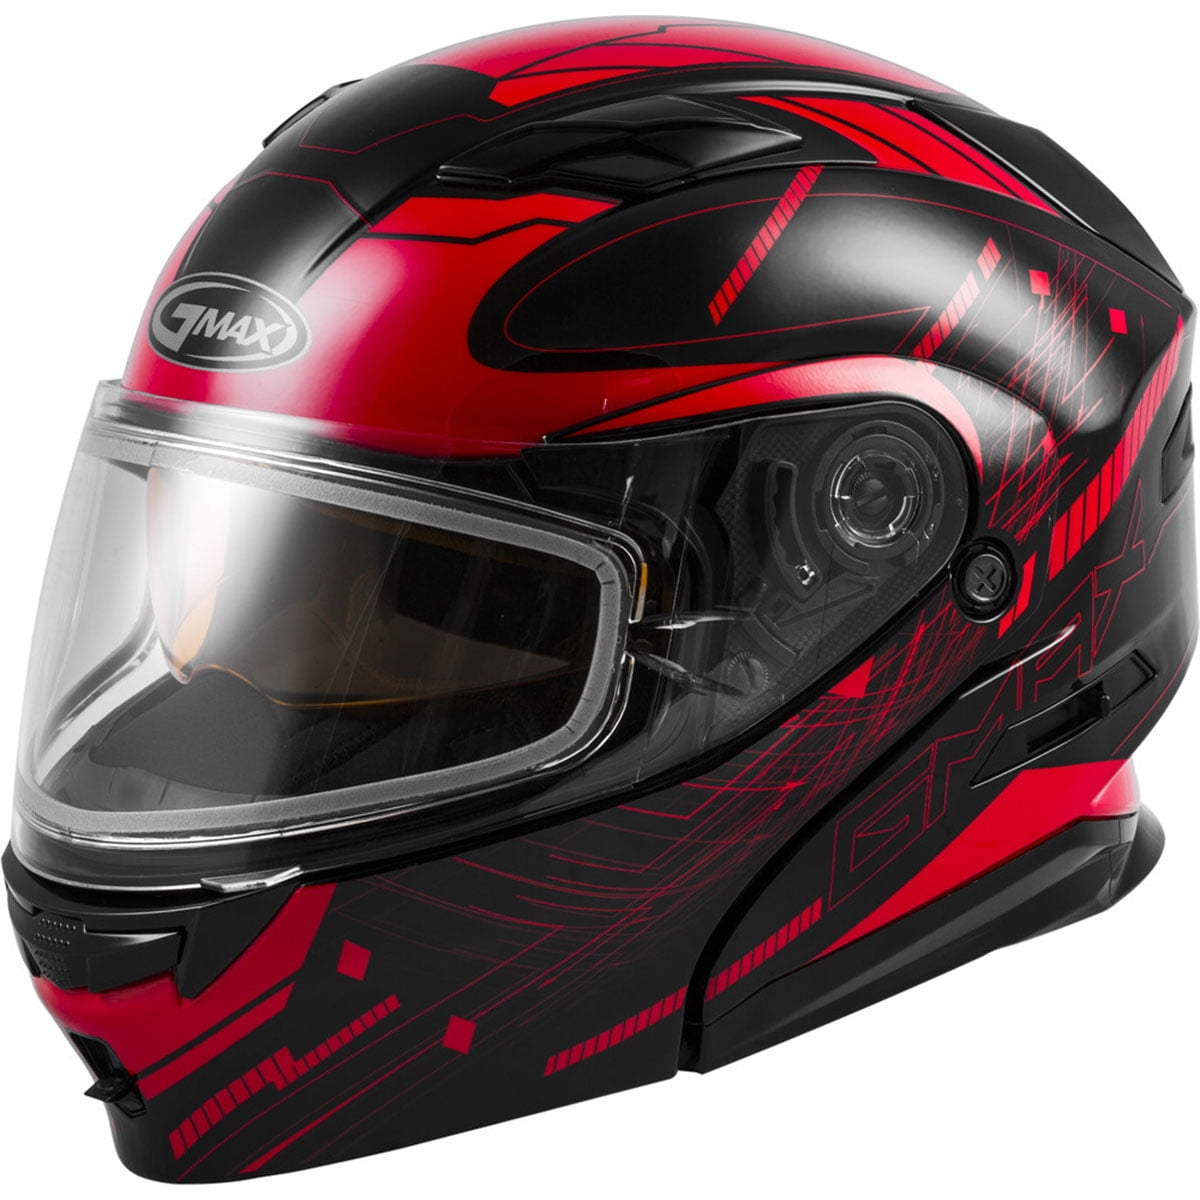 GMAX Adult MD-01 Modular Flip Up Motorcycle Helmet All Solid Colors XS-3XL